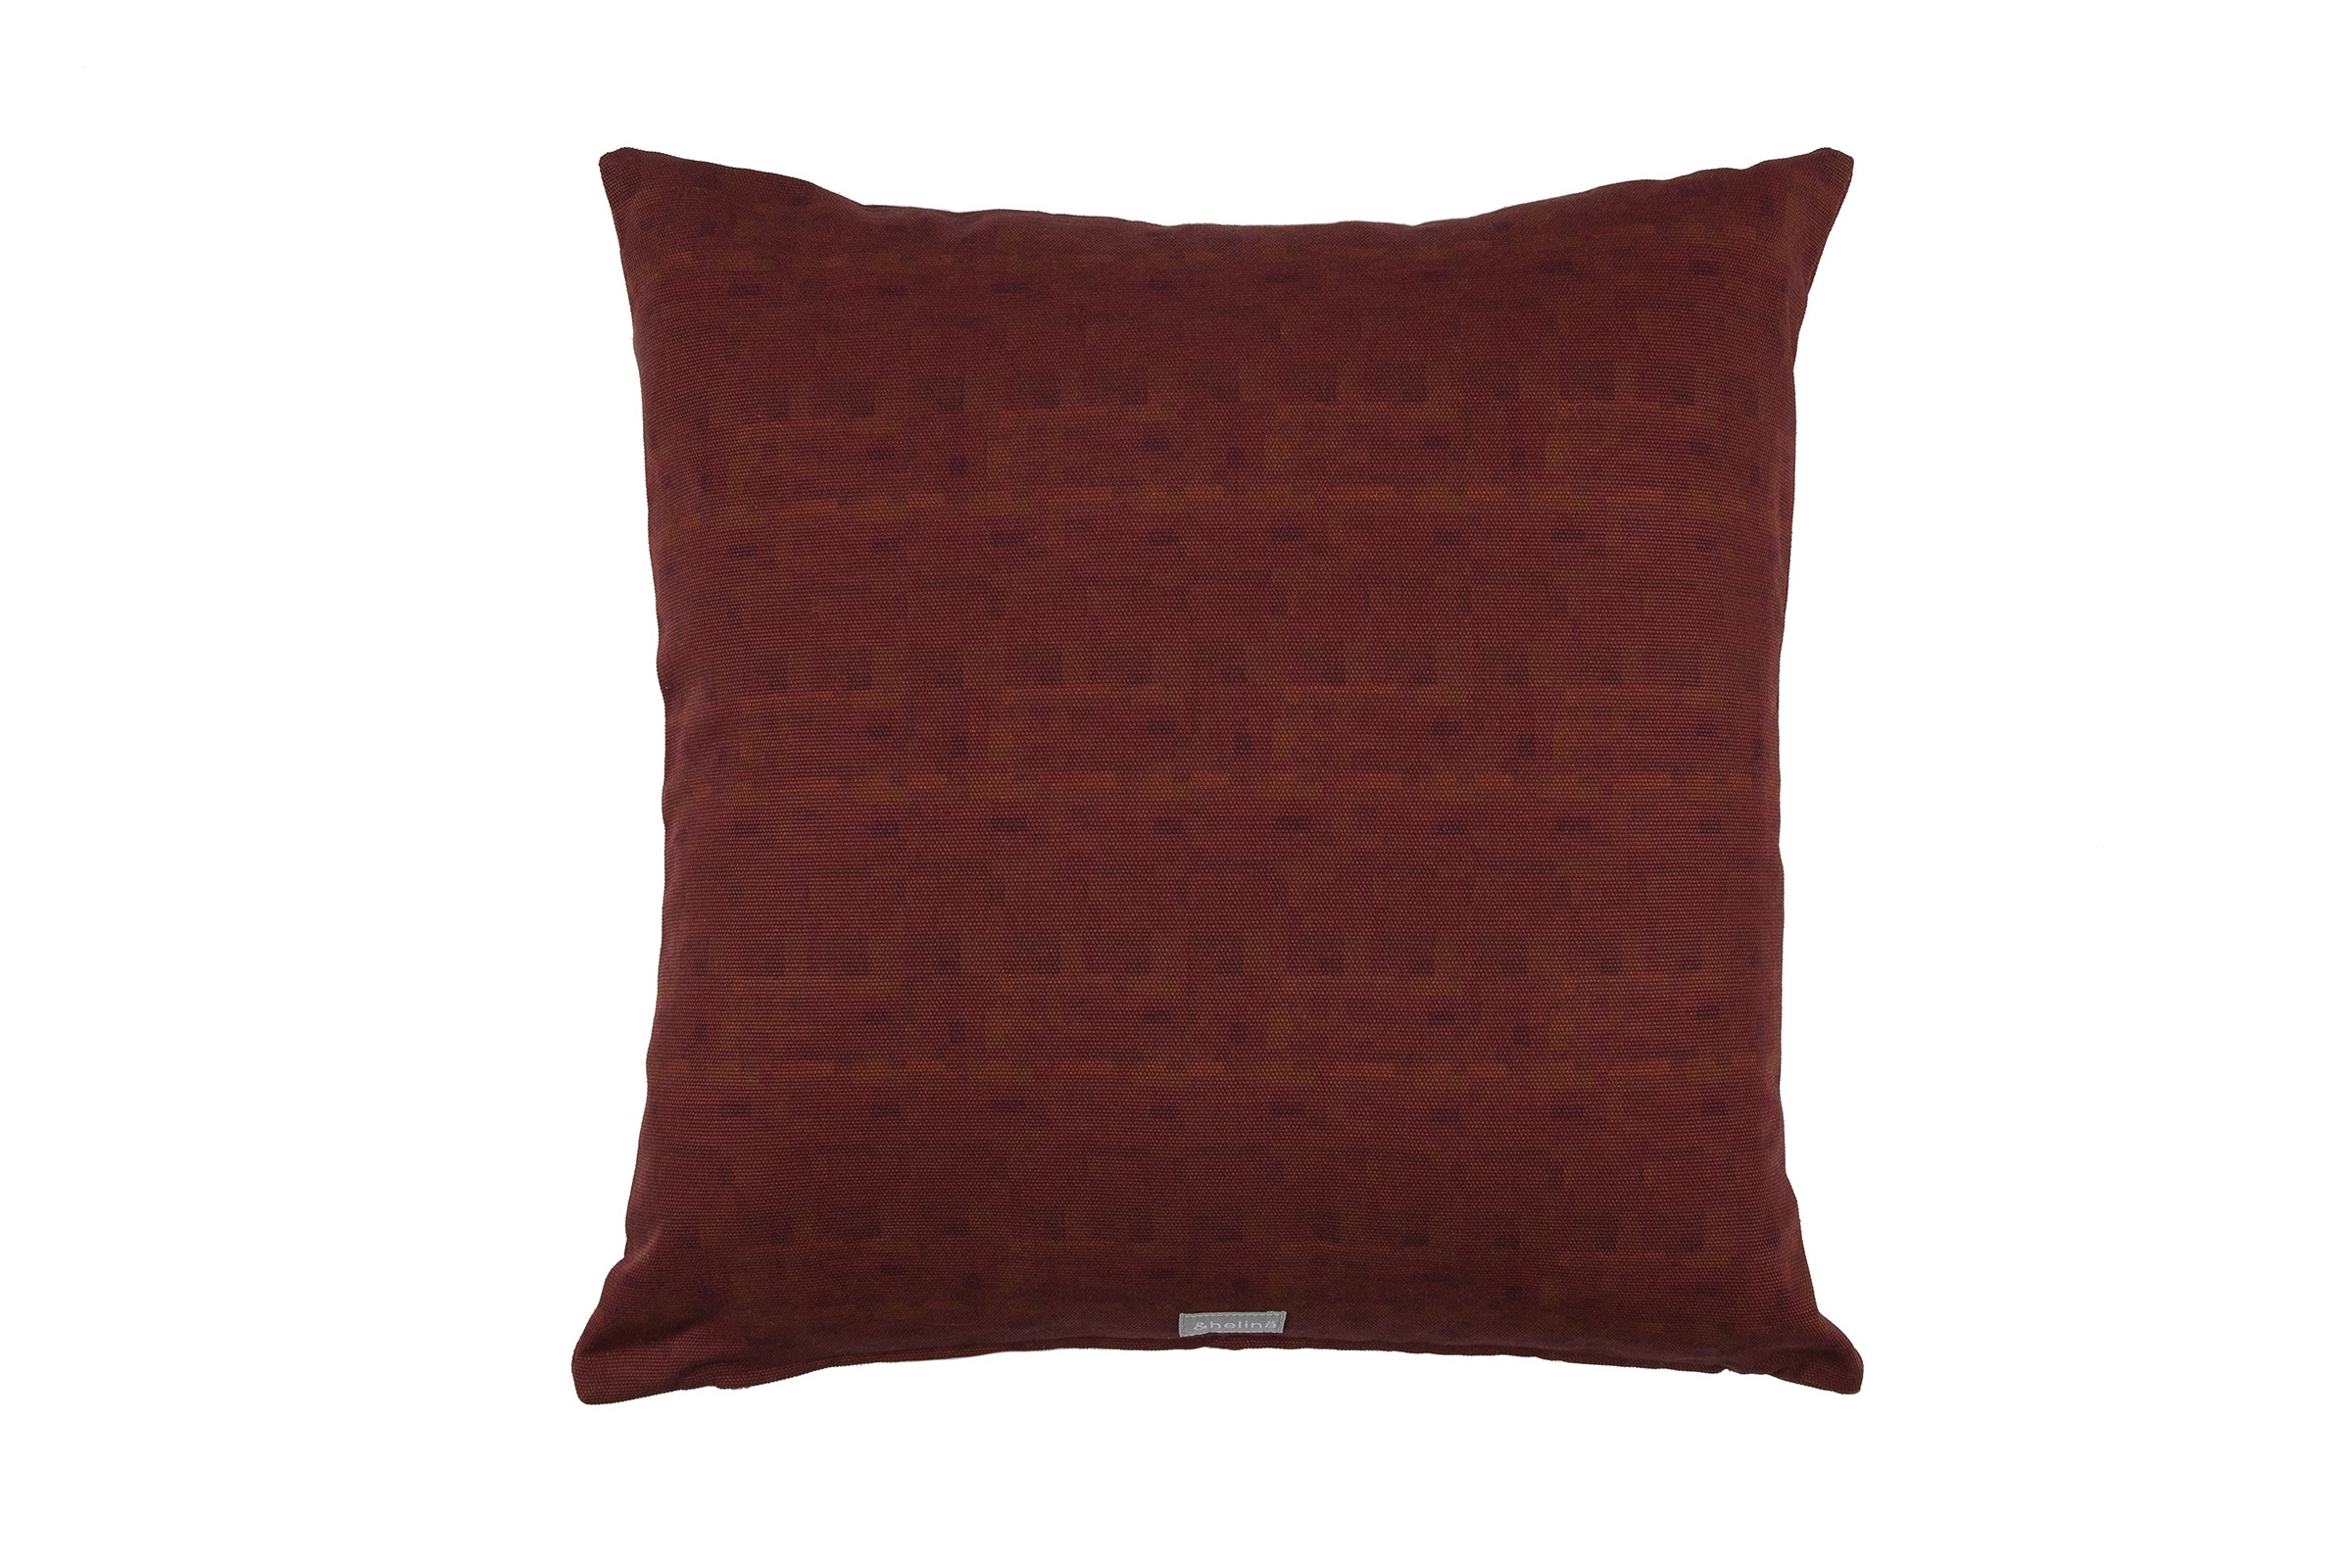 cushion cover;
Rusty red sand